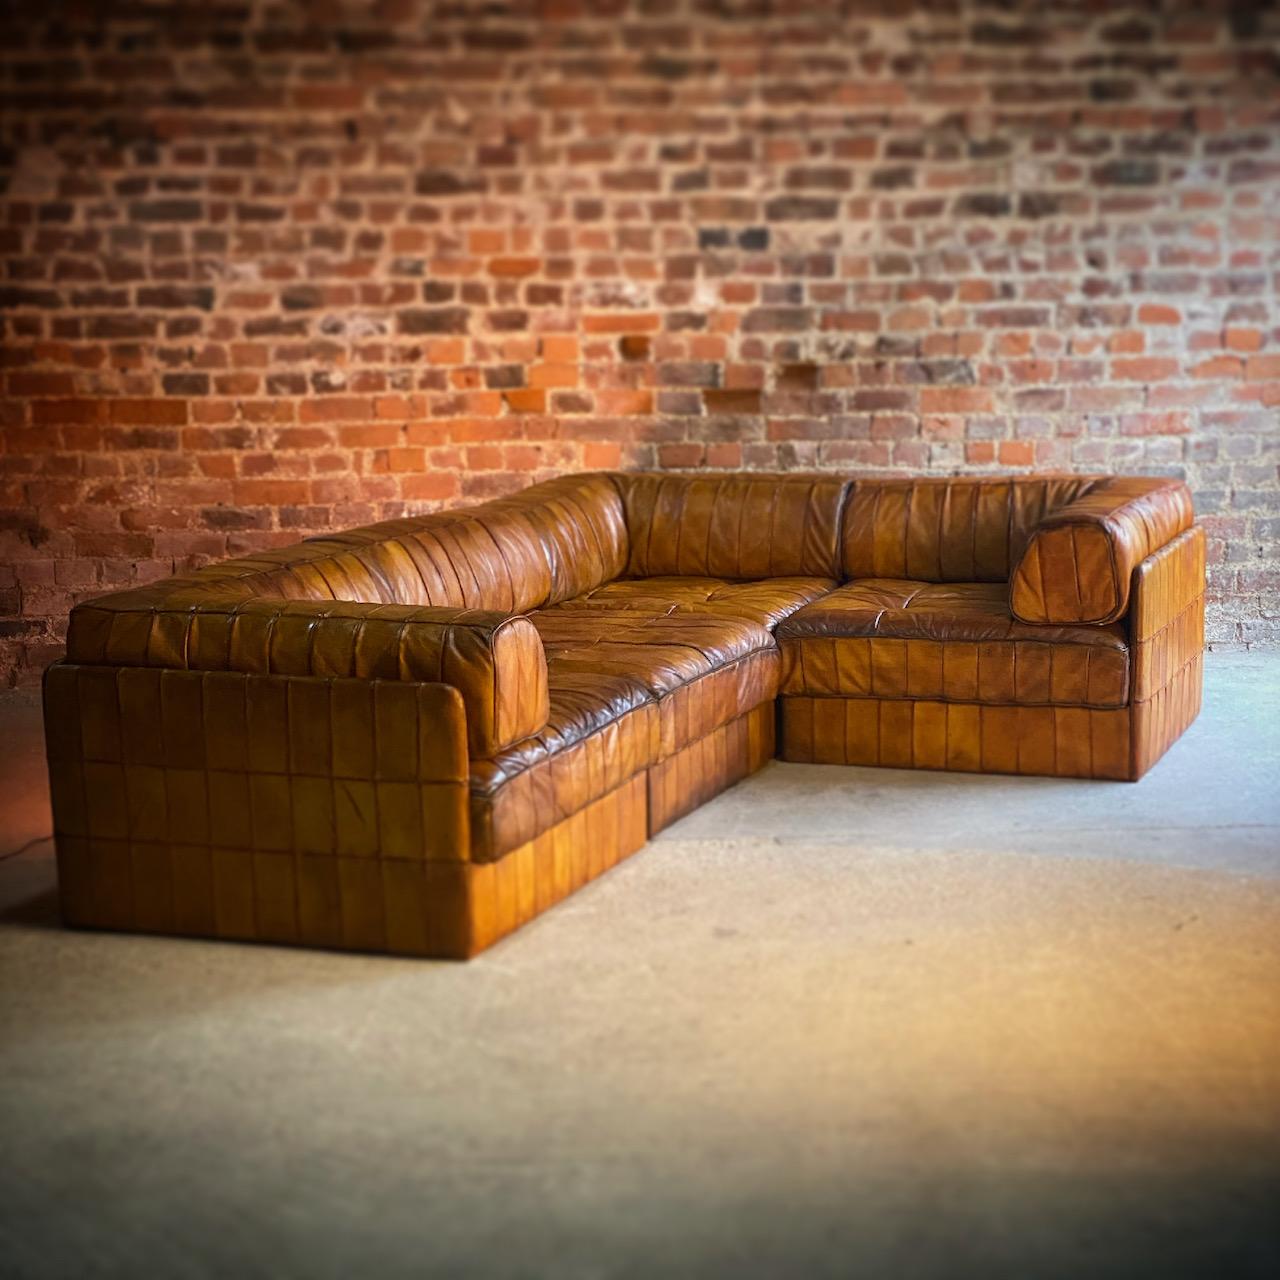 De Sede Model DS88 leather sectional sofa Switzerland 1970

De Sede Model DS88 patchwork leather sectional sofa Switzerland circa 1970, This sublime four sectional sofa is made by quality manufacturer De Sede in Switzerland, known for their